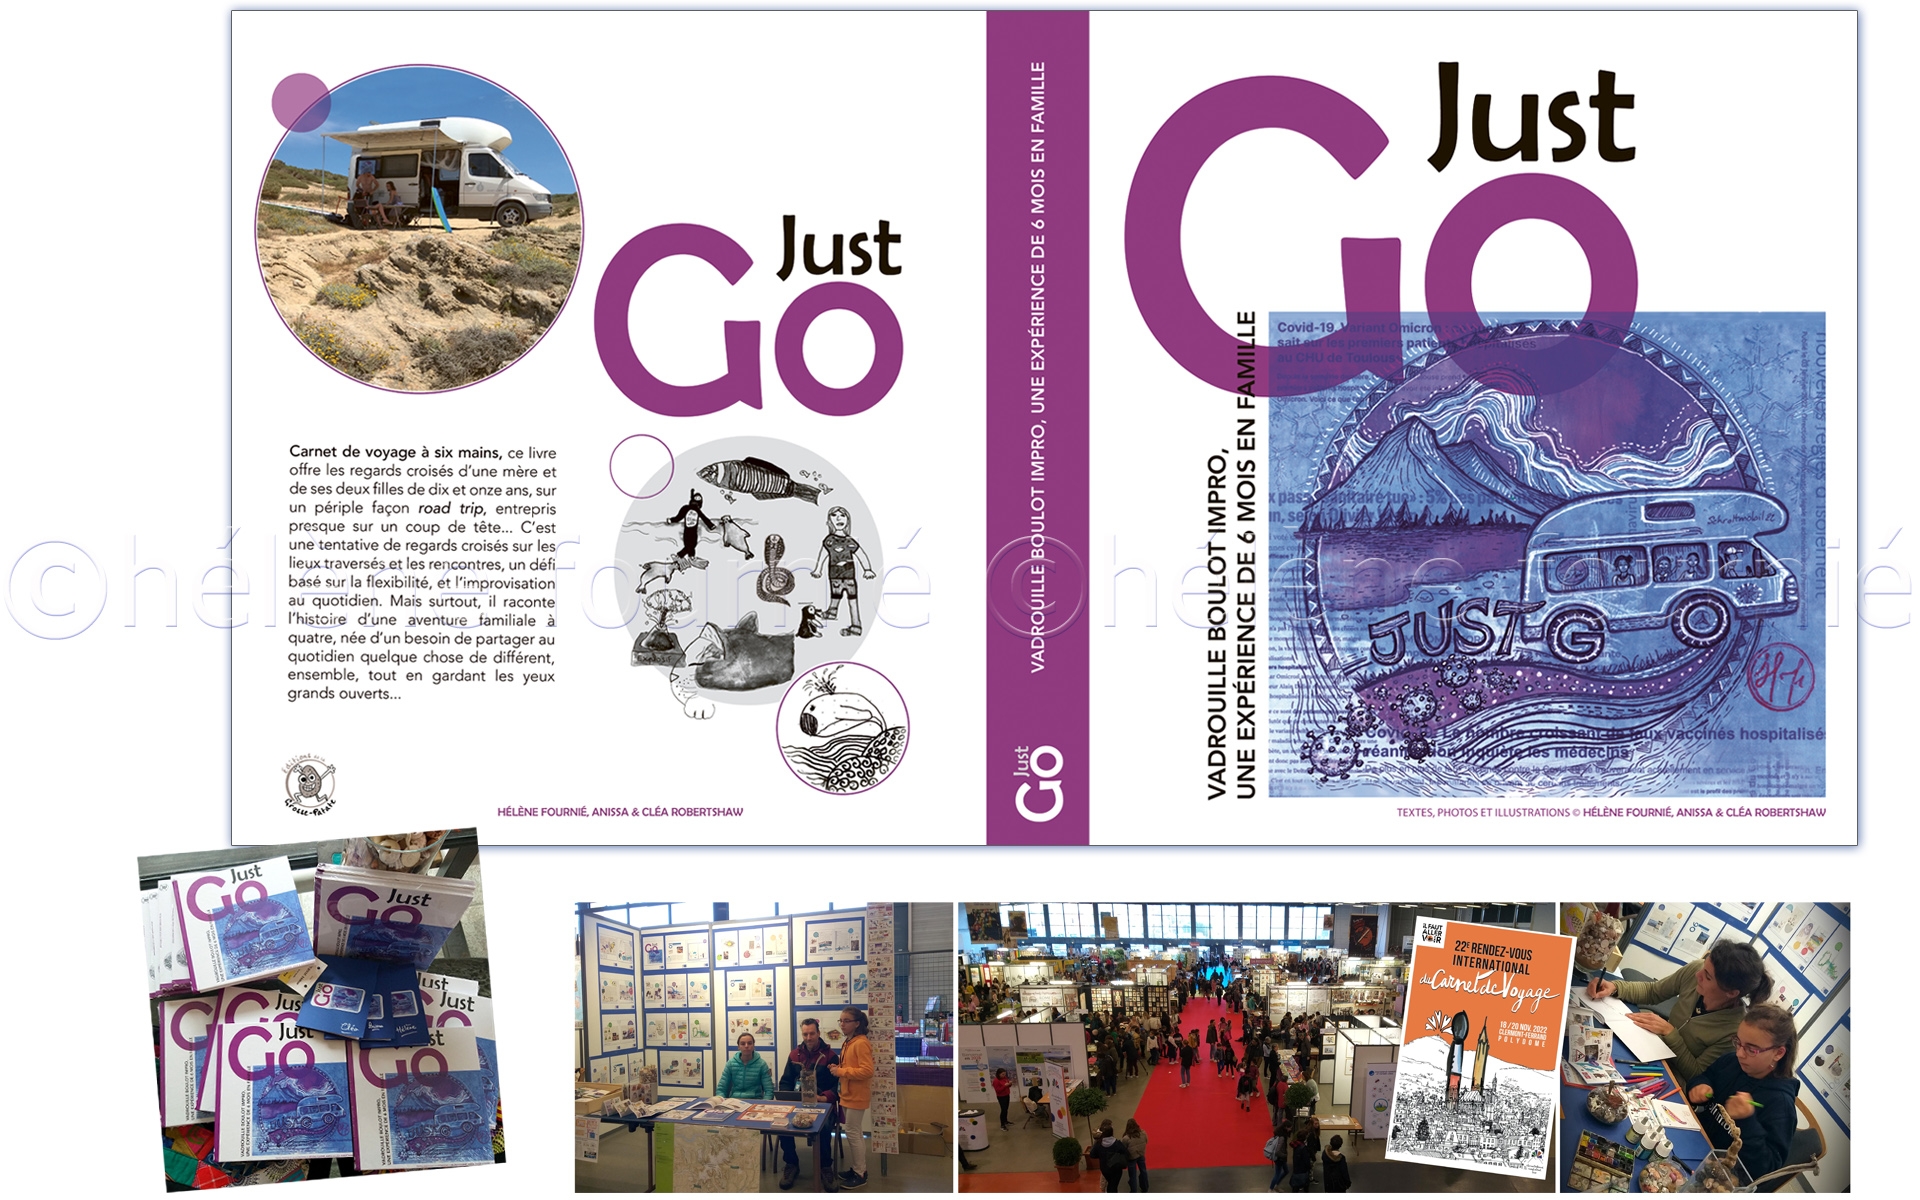 Just Go! project - 6 hands travel diary